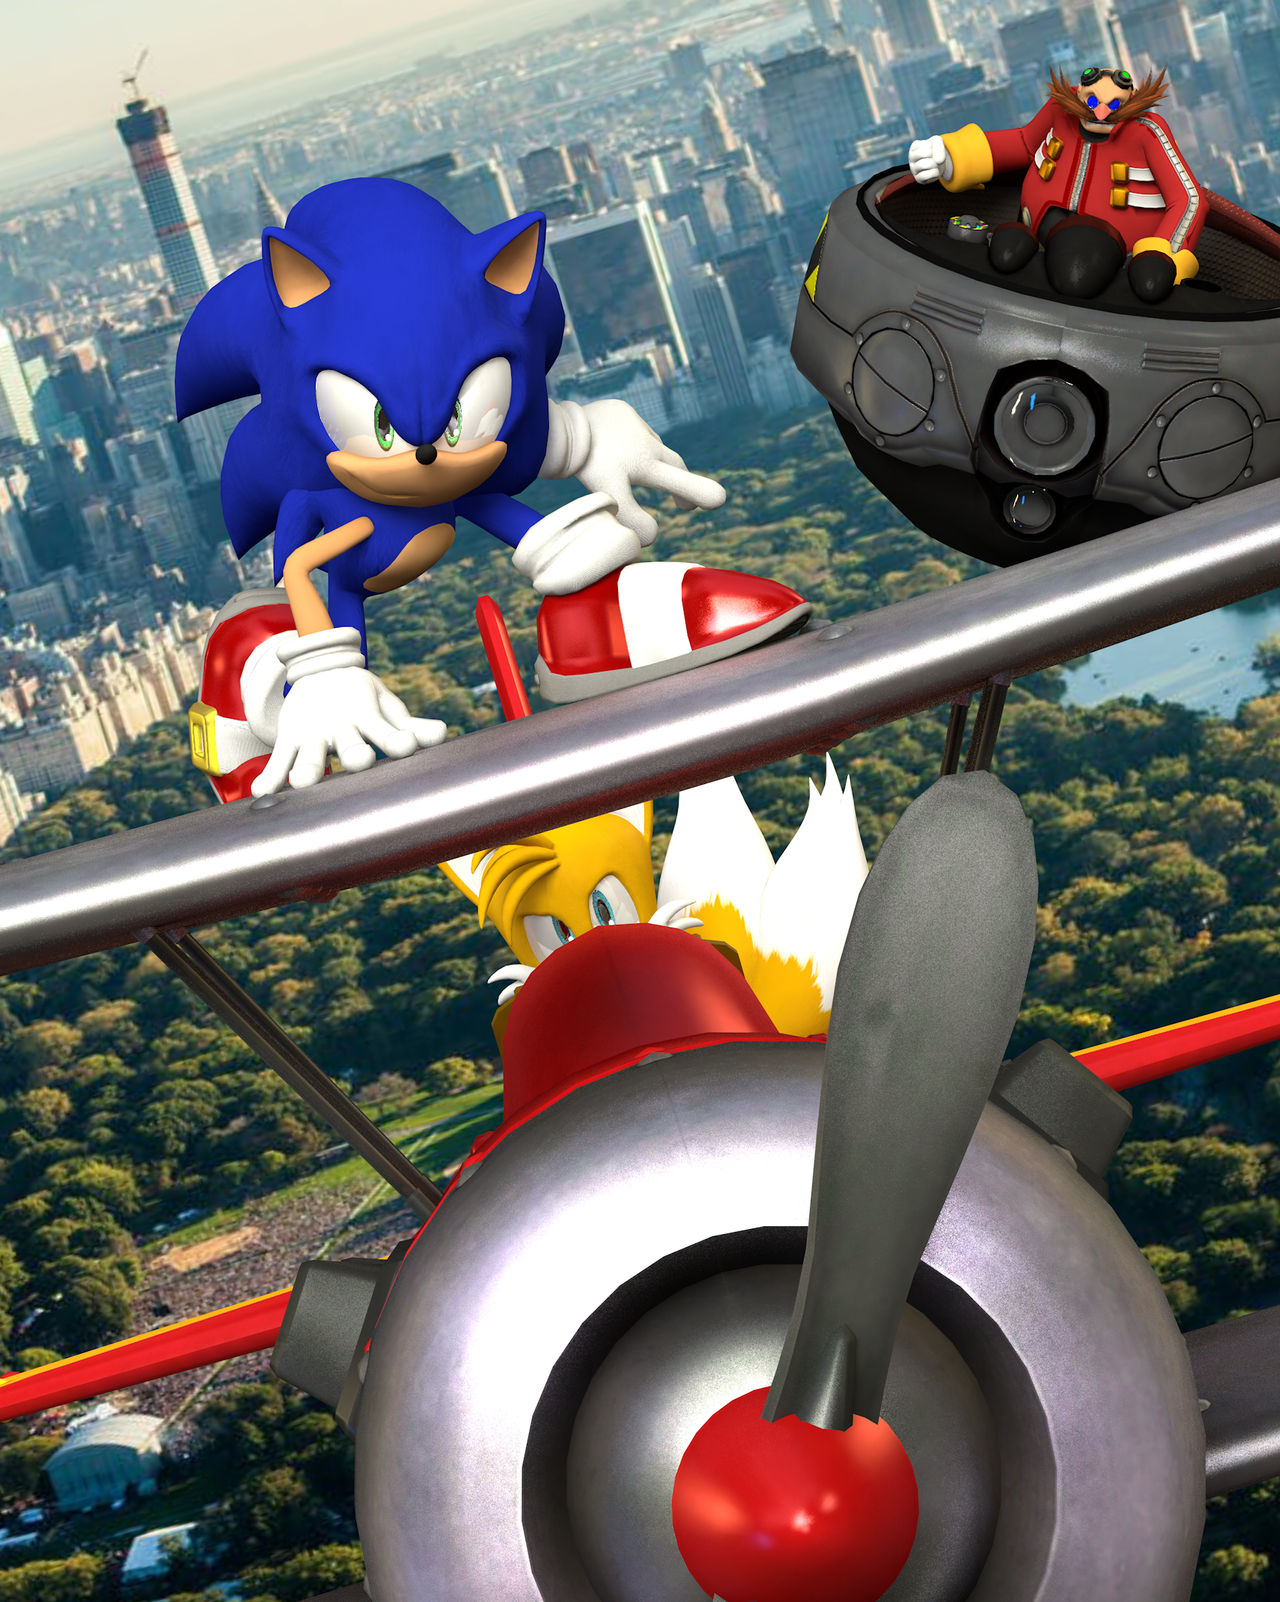 Sonic Speed Simulator Main Render in my style by blue007prime on